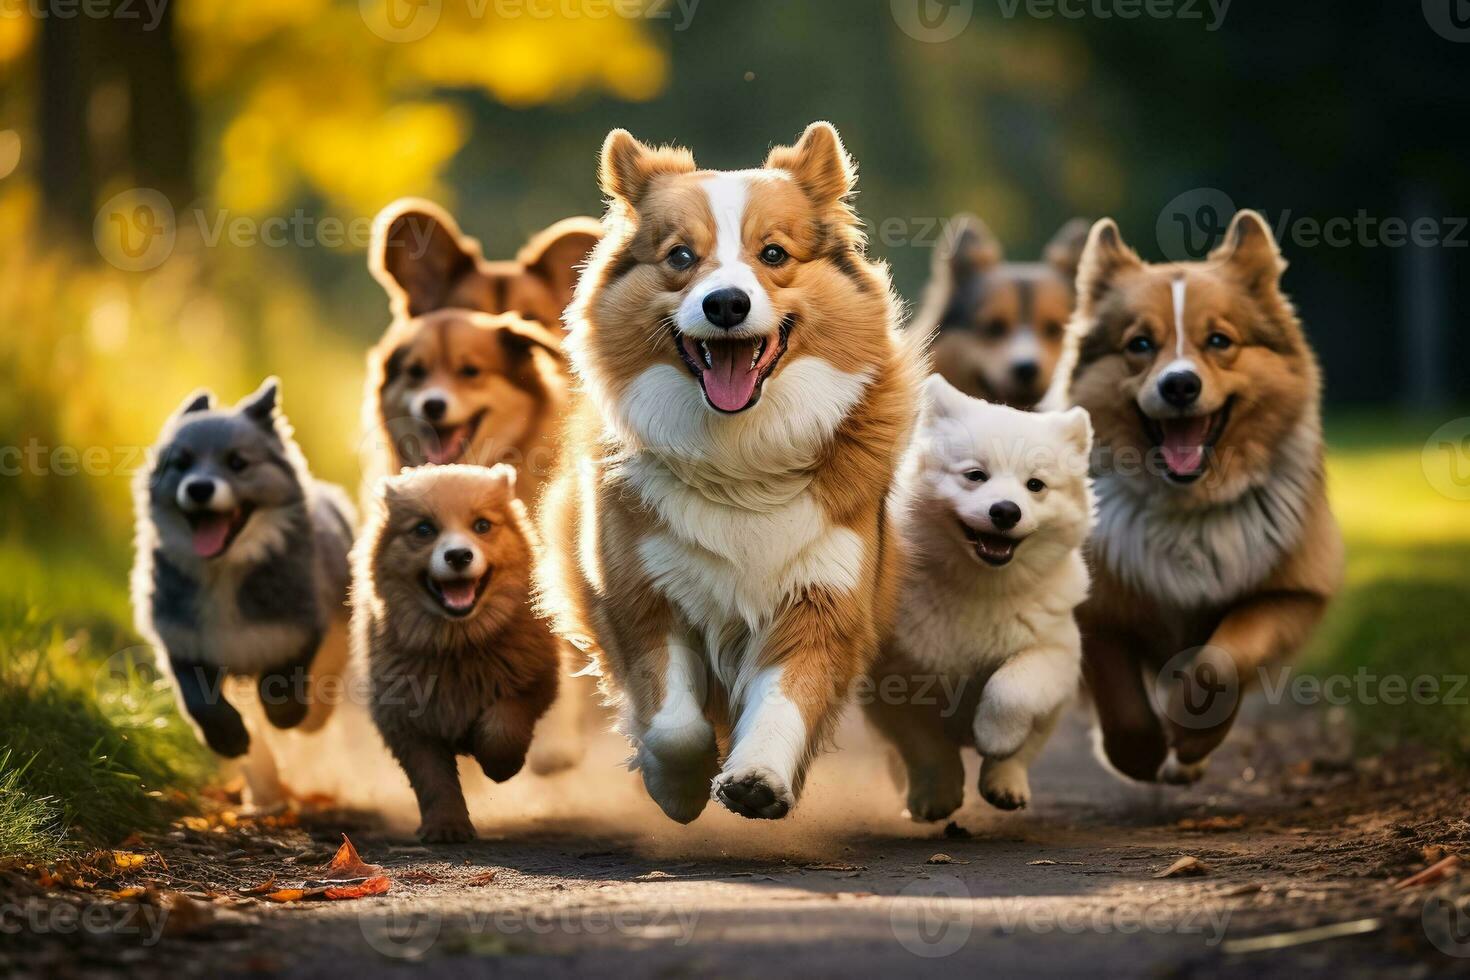 A joyful moment captured Adorable puppies romp with their proud parent dogs in a vibrant park setting photo